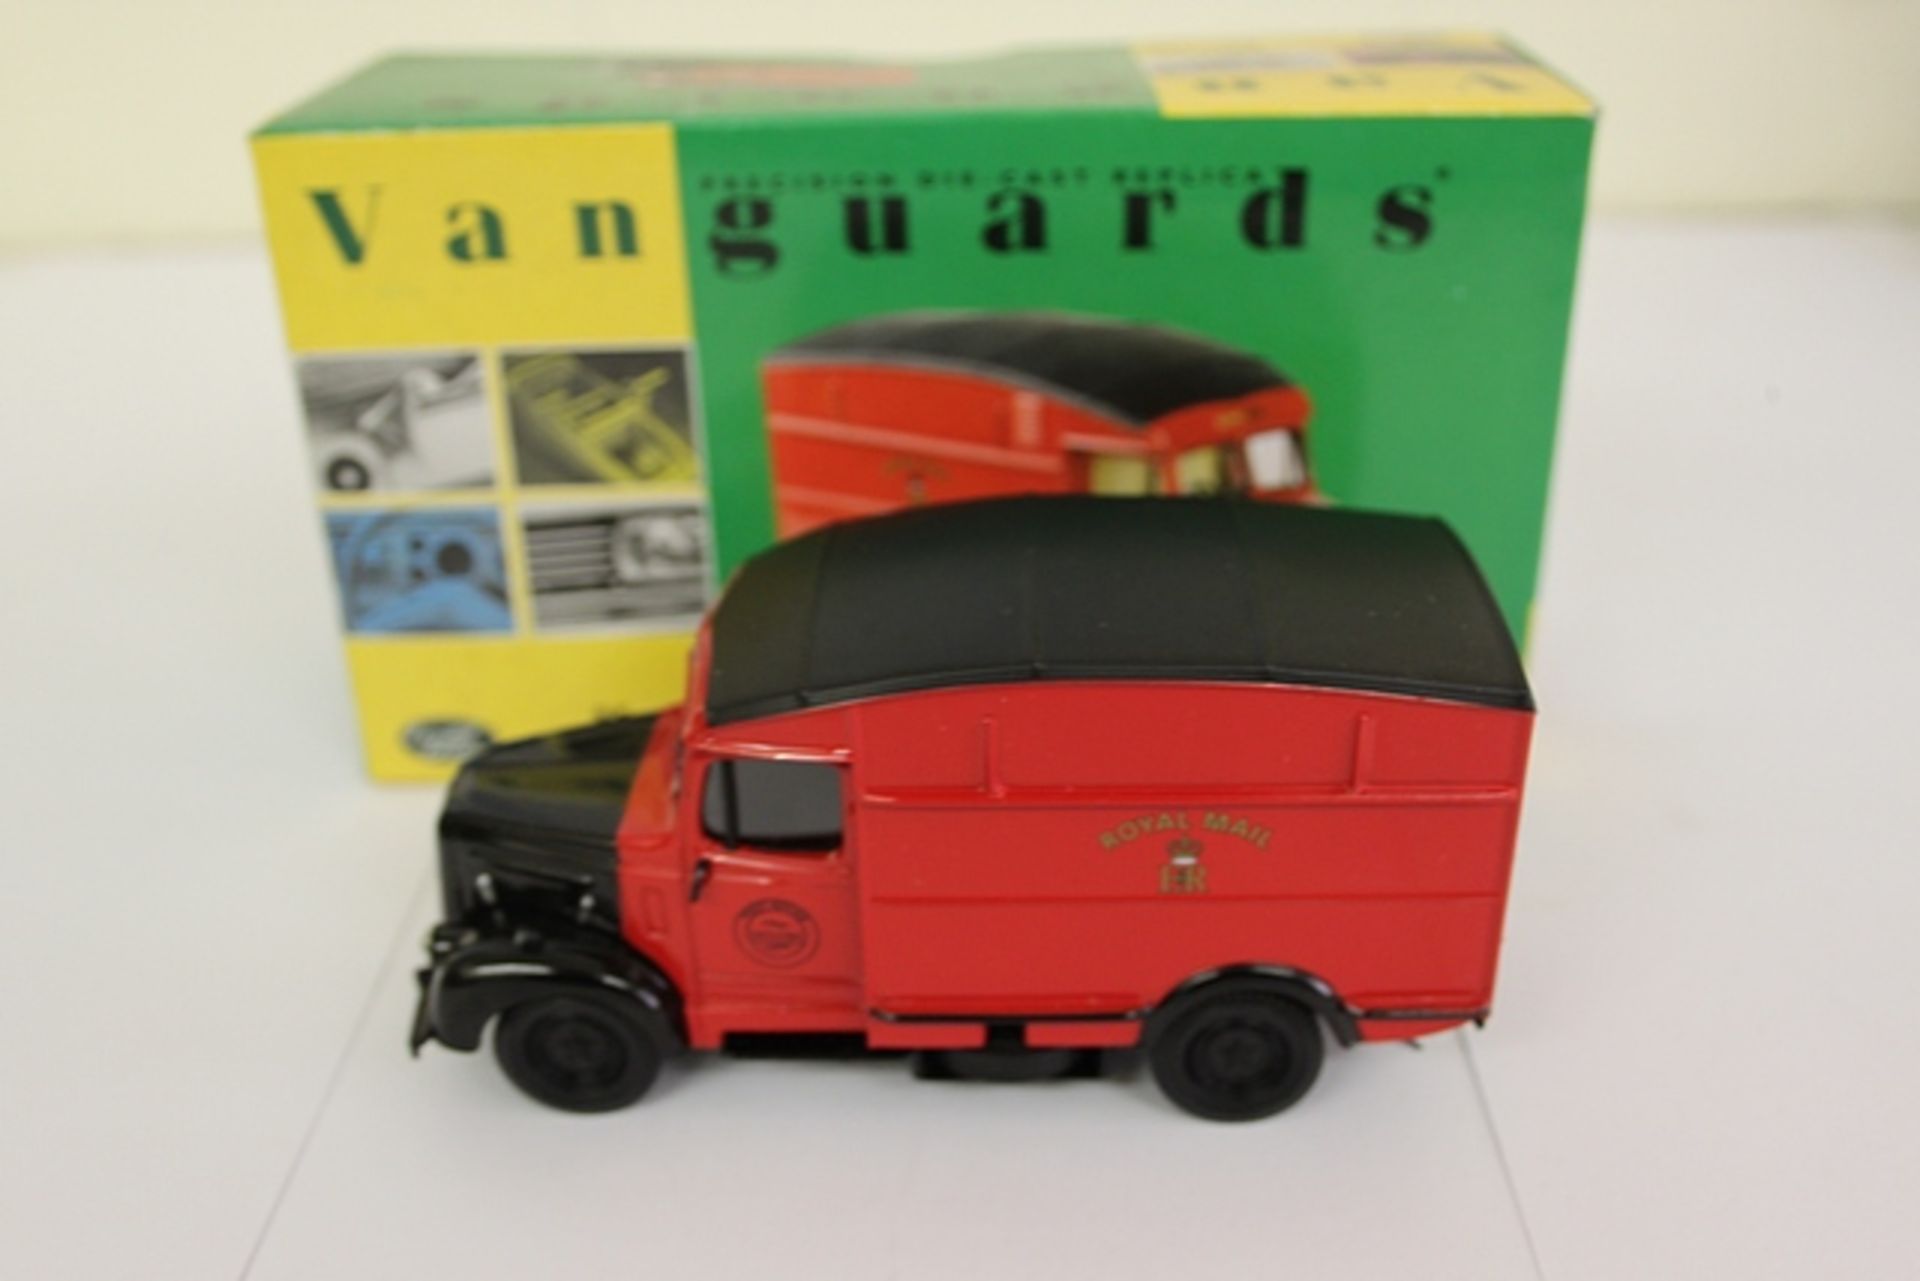 Vanguards #VA07501 Diecast Royal Mail Morris Commercial Van Scale 1/43 Complete With Box - Image 2 of 2